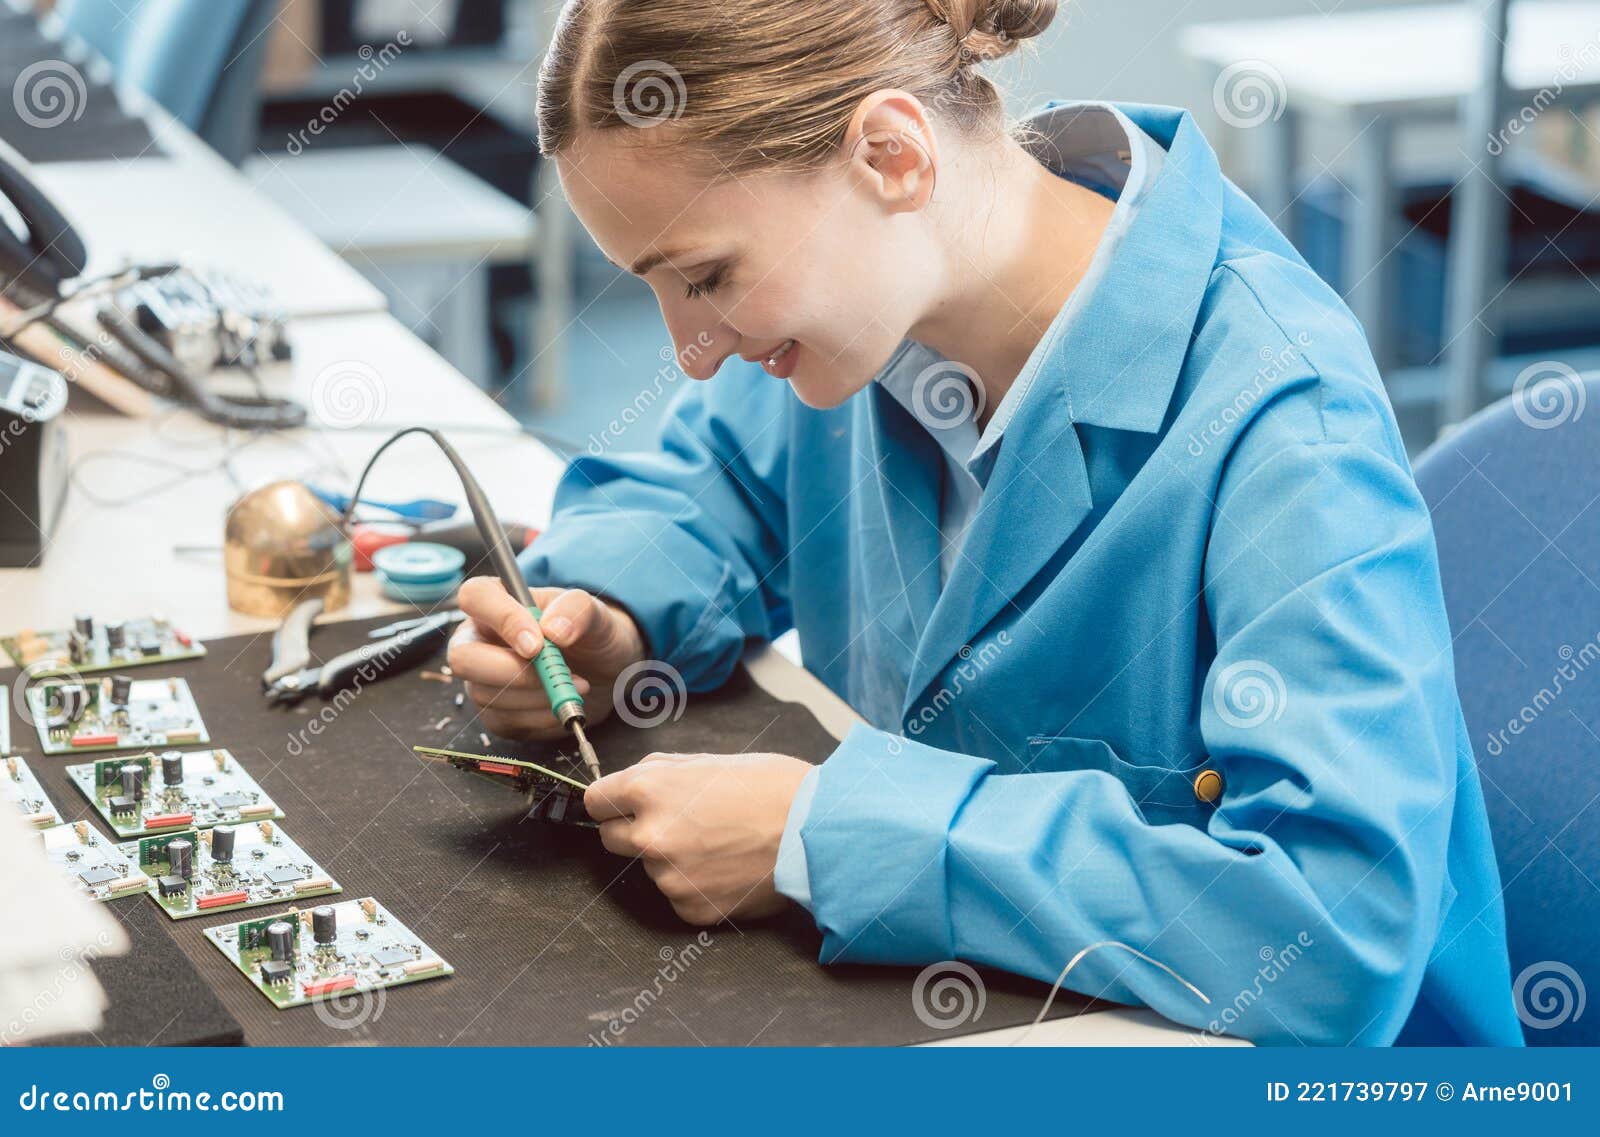 worker in electronics manufacturing soldering a component